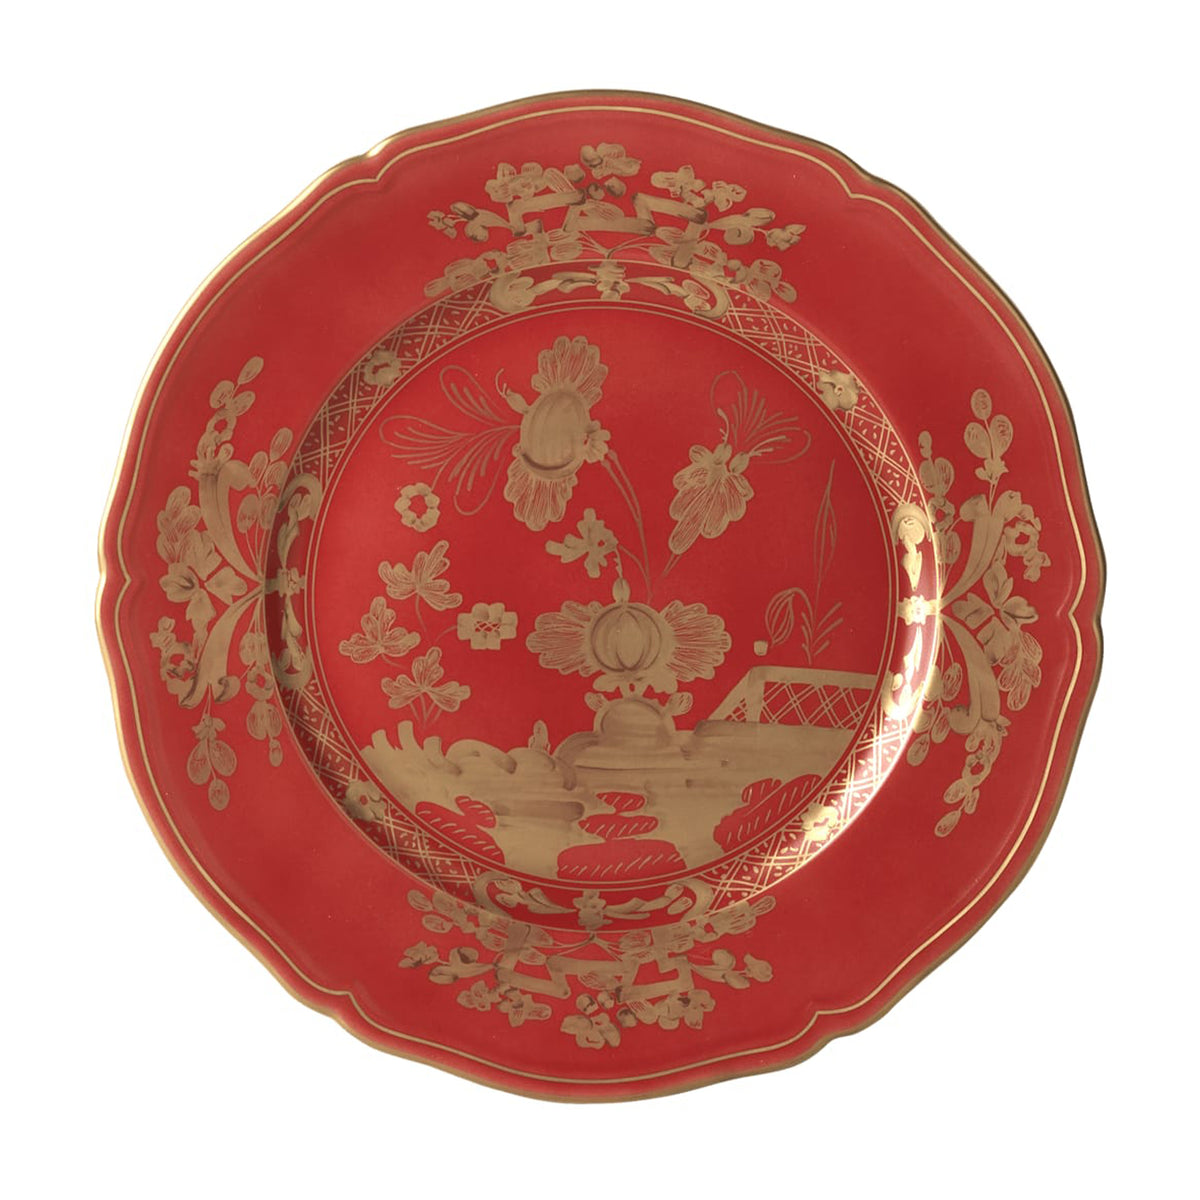 Oriente Italiano Charger Plate in Rubrum